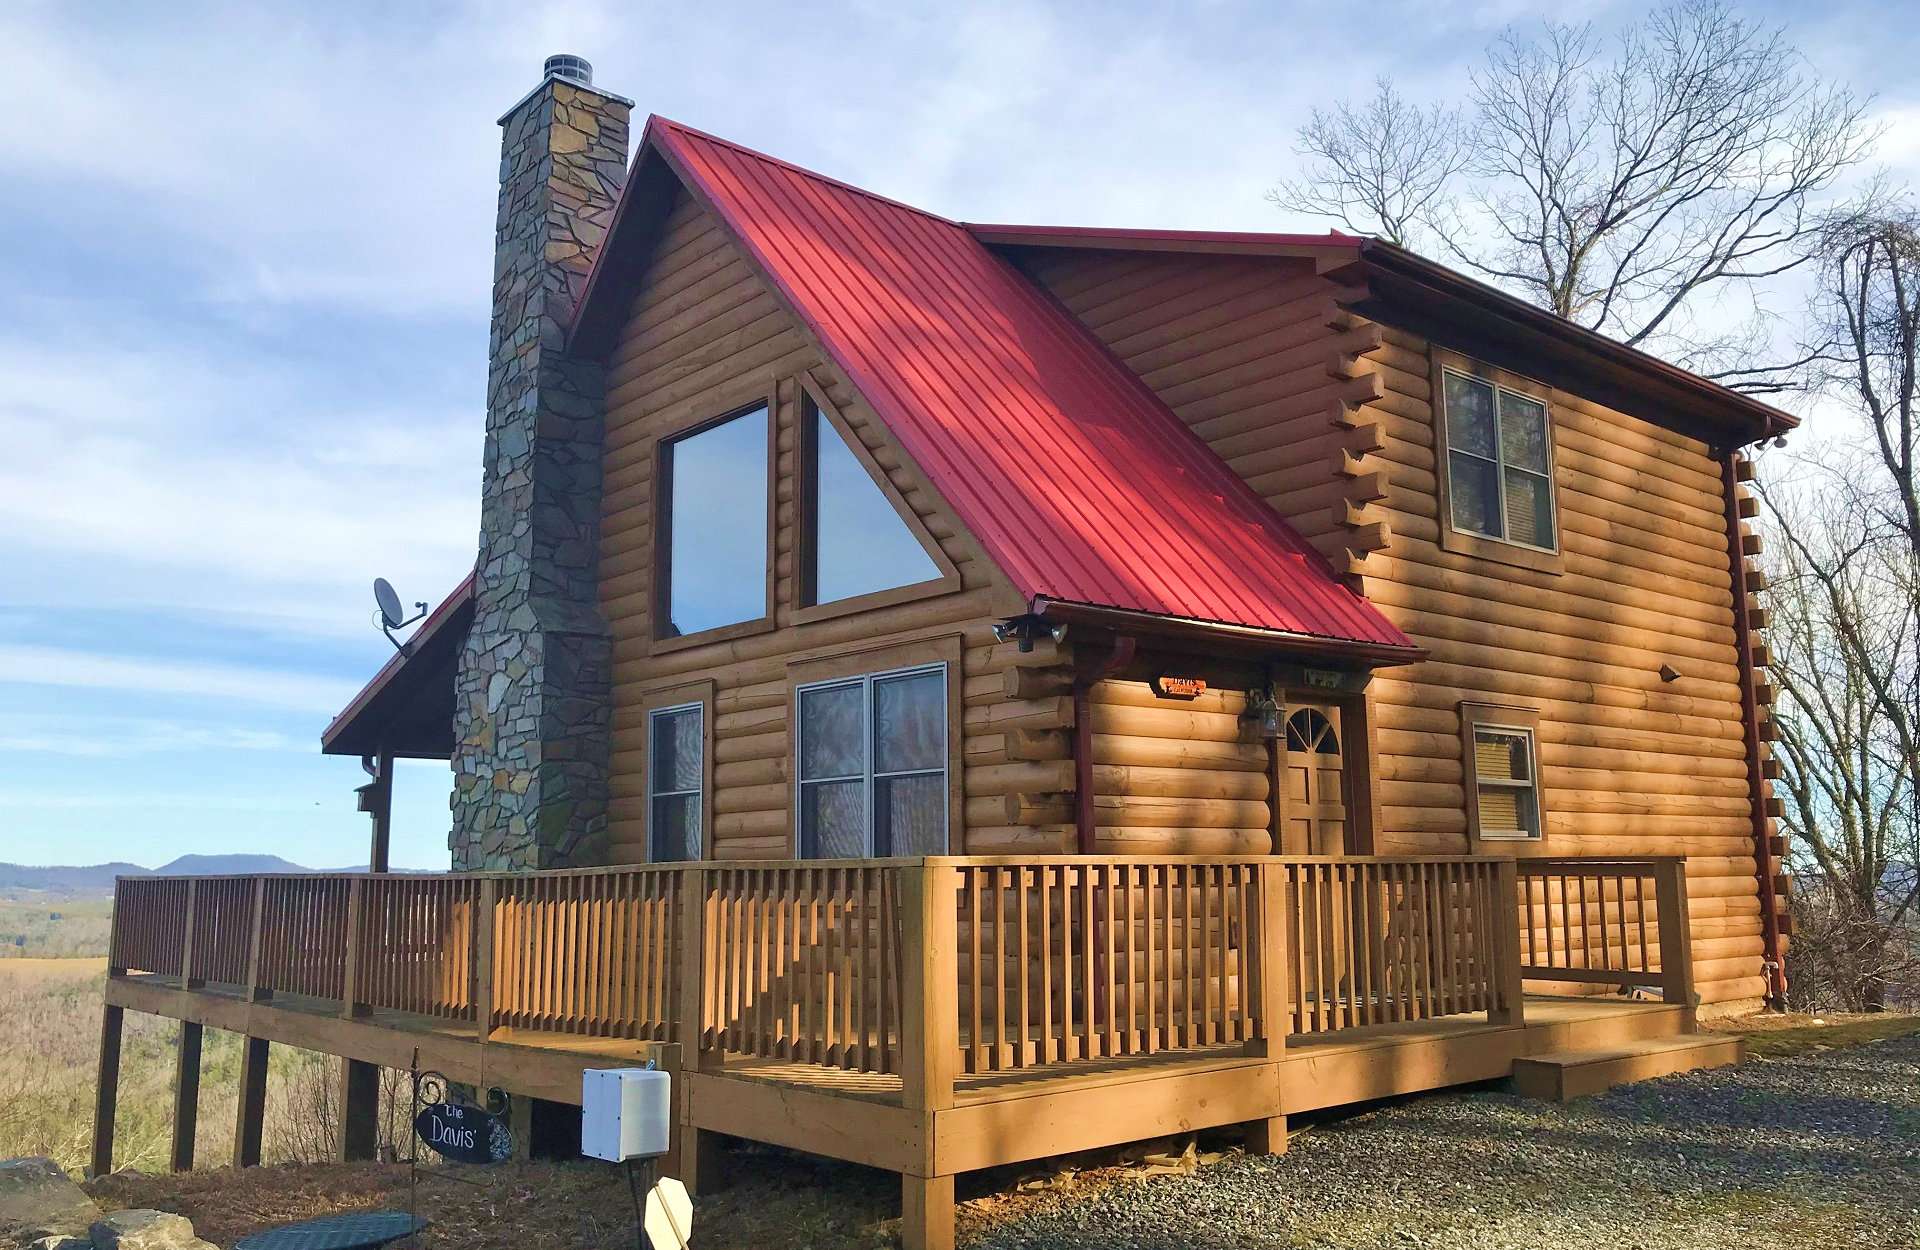 Offered at only $299,000, this 3-bedroom, 2-bath log cabin with fantastic long range mountain views and nestled on a 2 acre setting is a great option for your NC Mountain retreat cabin. Call today for additional information or an appointment to view listing D180.